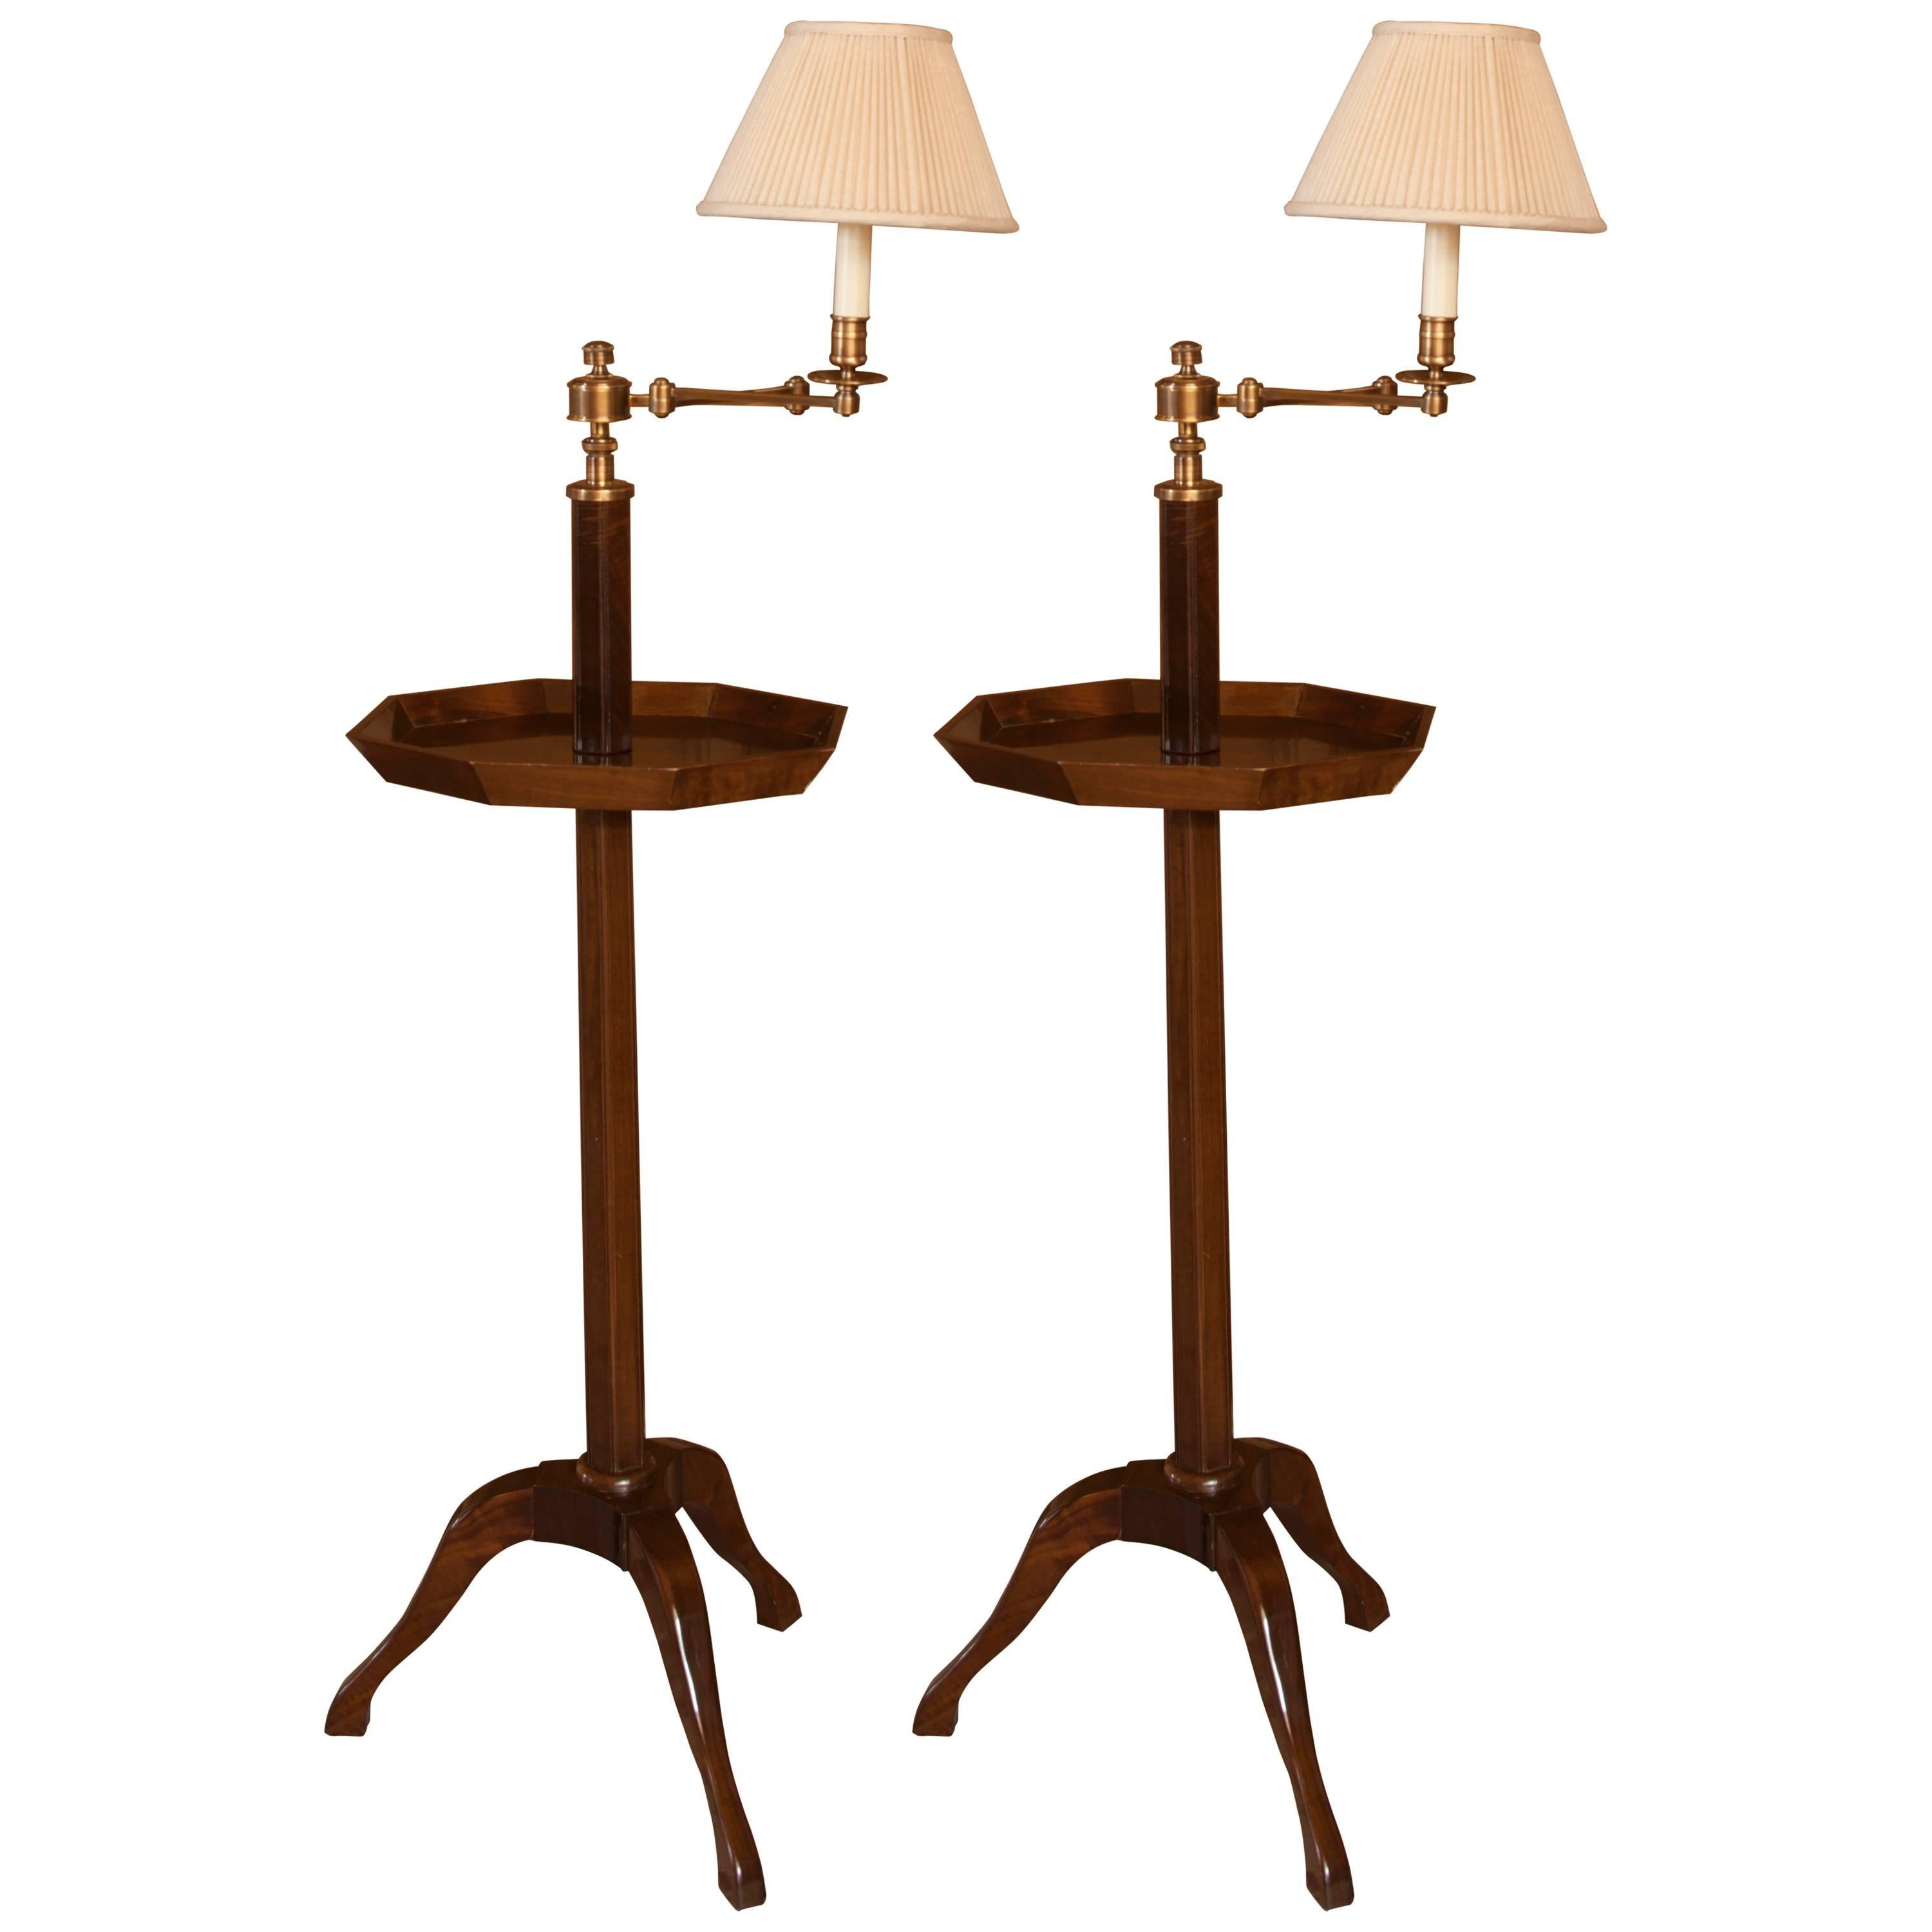 Pair of Mahogany and Brass Swing-Arm Lamp Tables